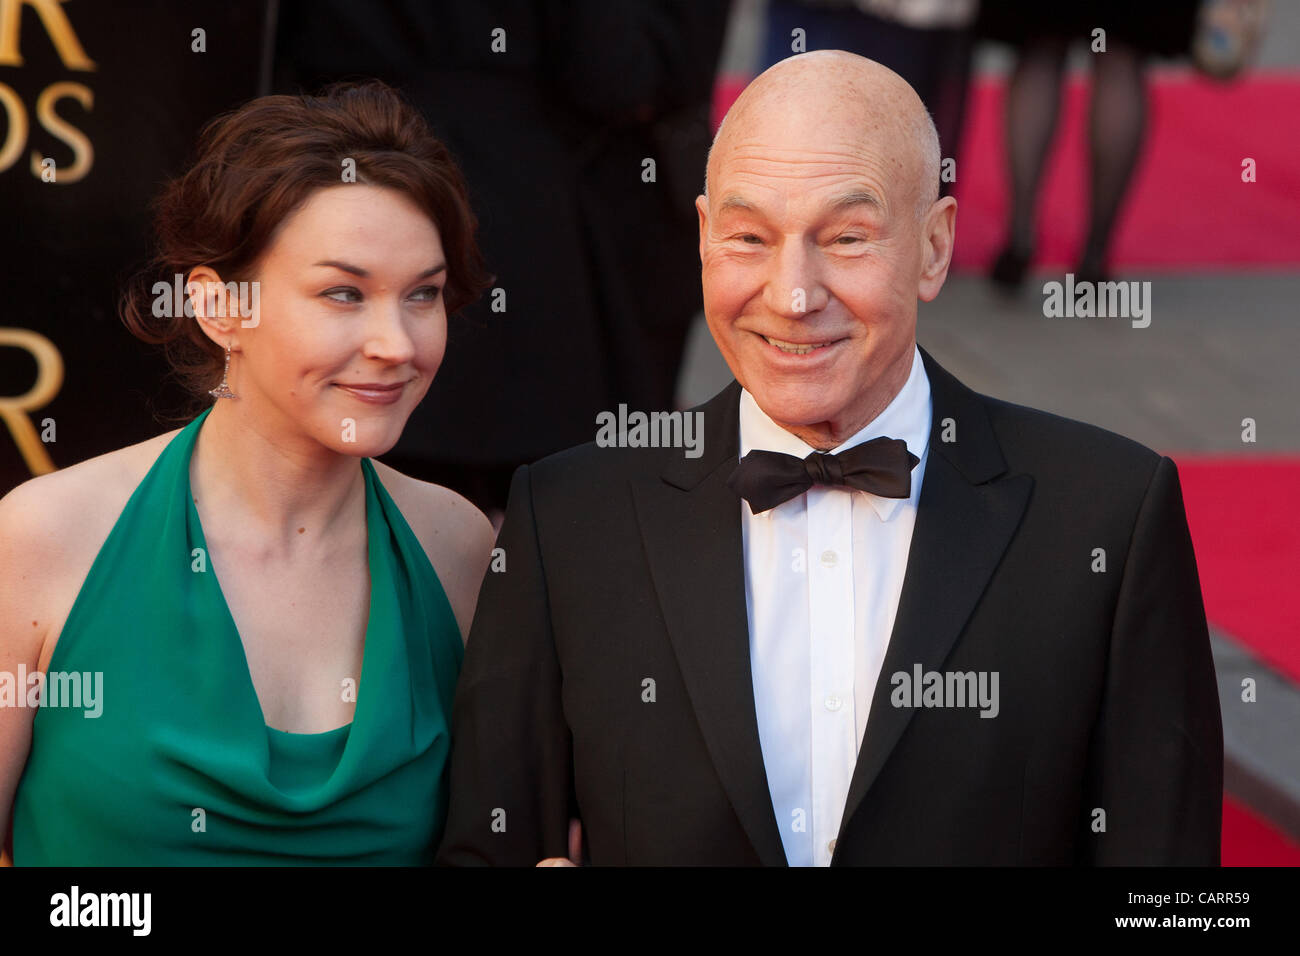 London, UK, 15/04/2012. Actor, Patrick Stewart with Sunny Ozell , arrive at the 2012 Laurence Olivier Awards Stock Photo